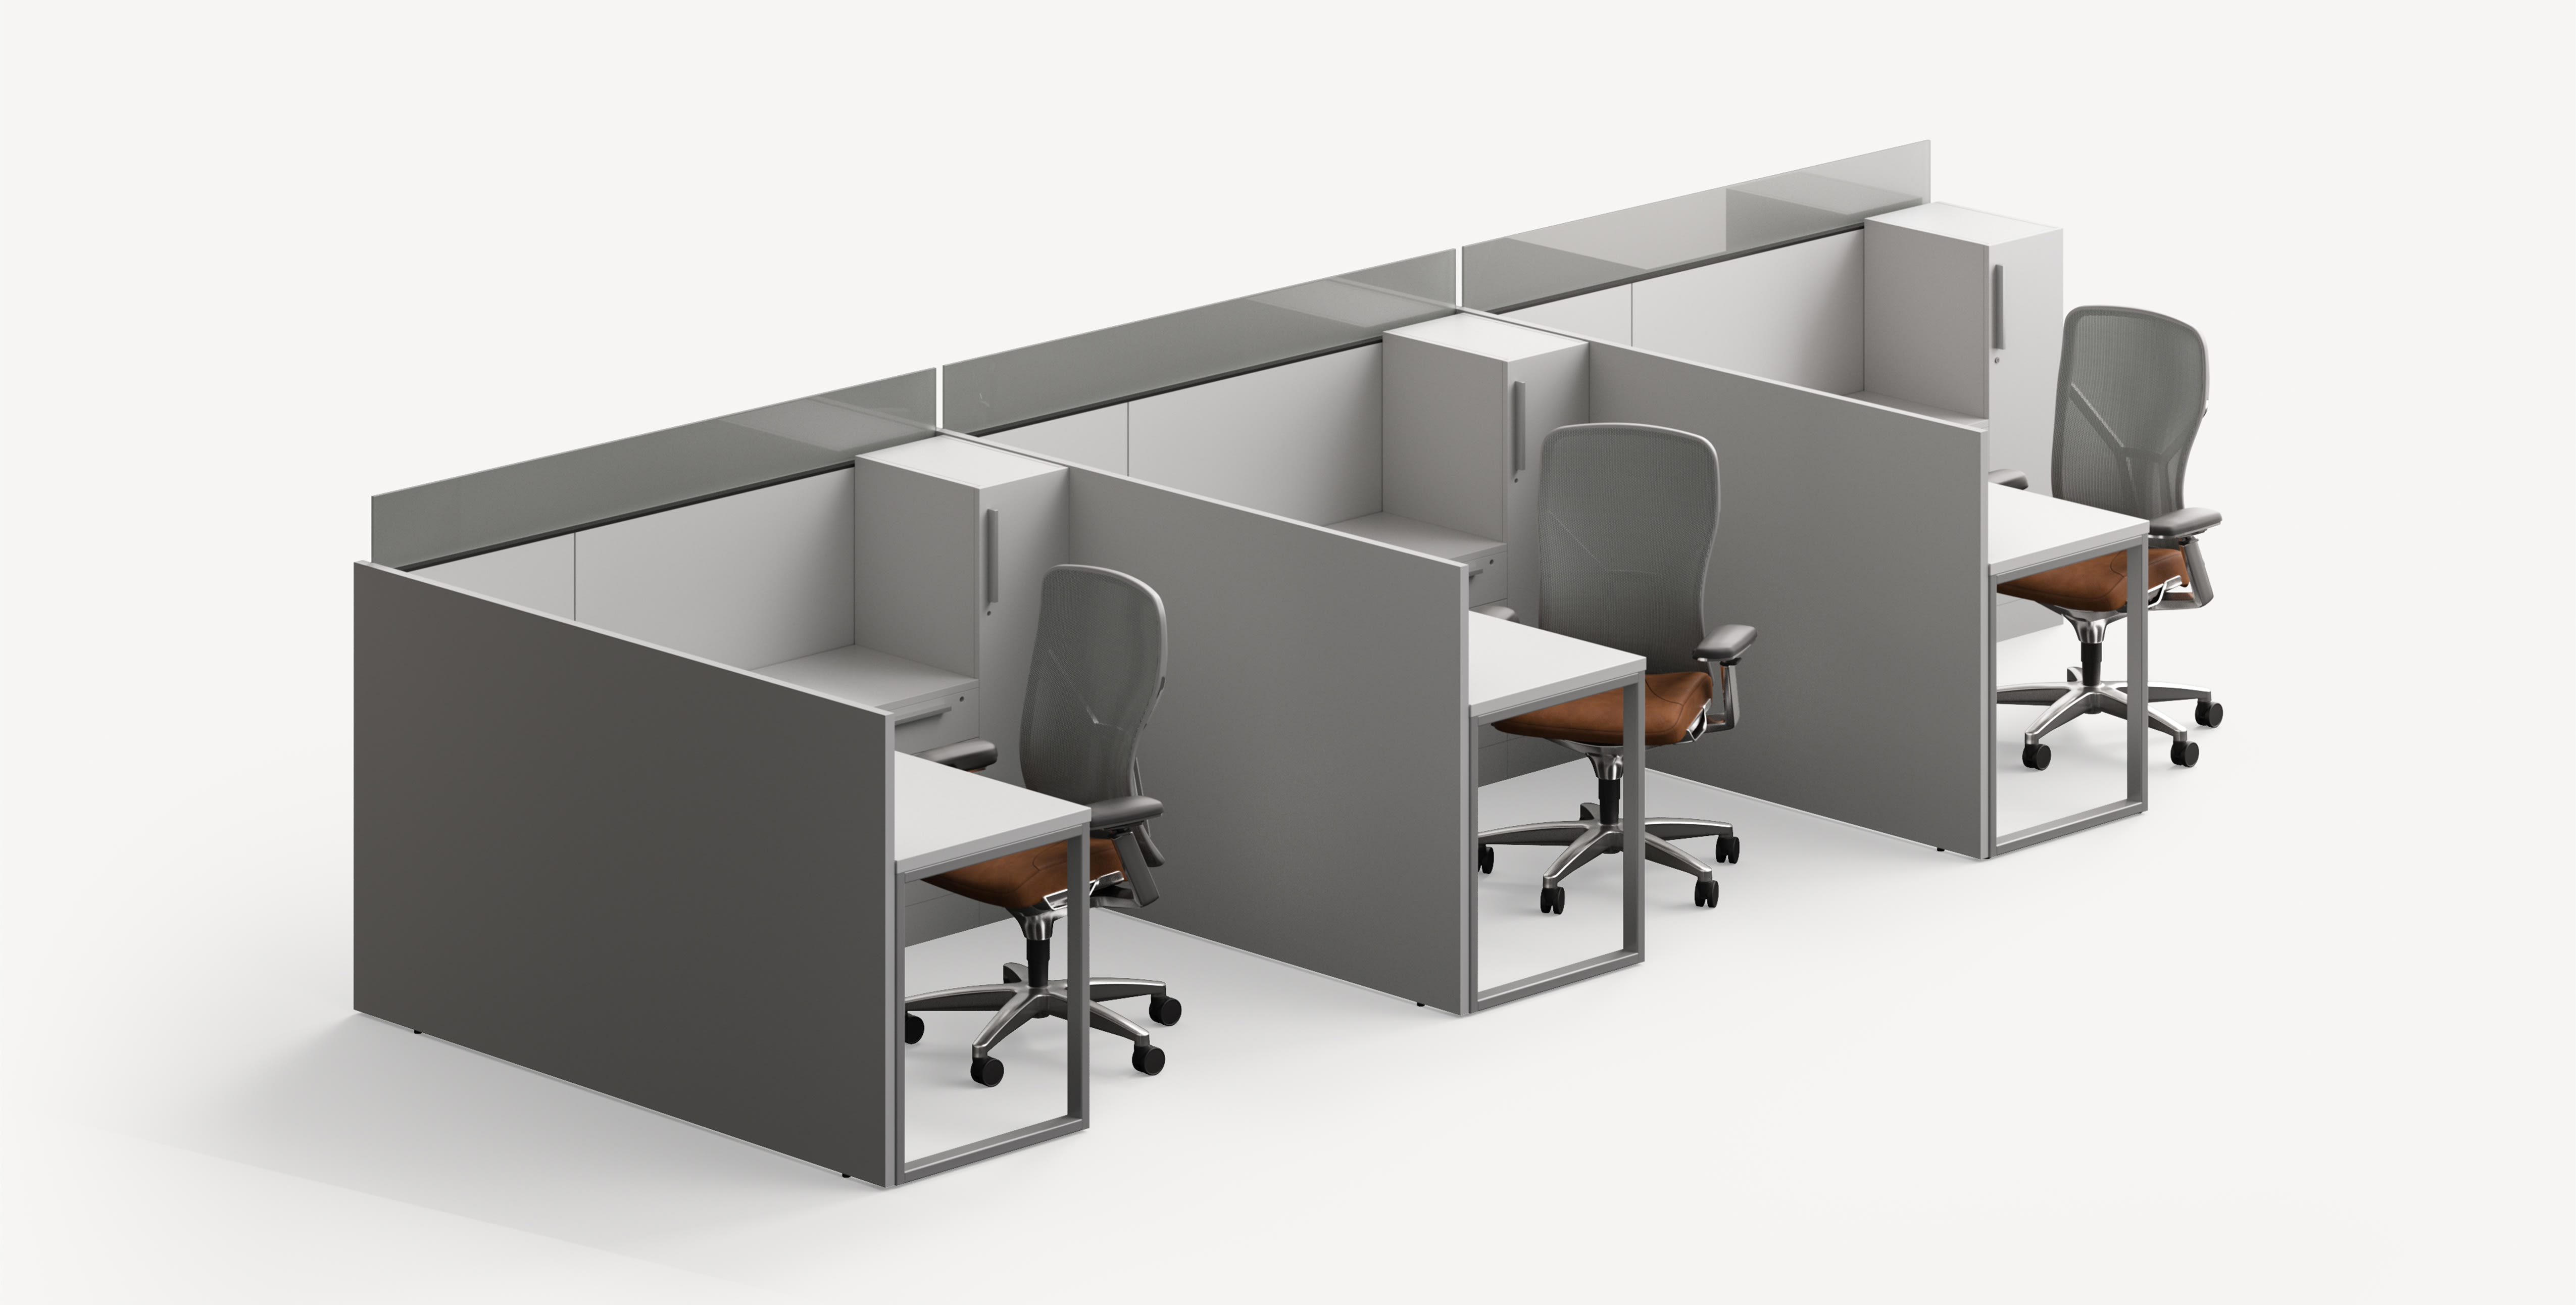 Allsteel Stride Panel system configuration with three cubicle modules,